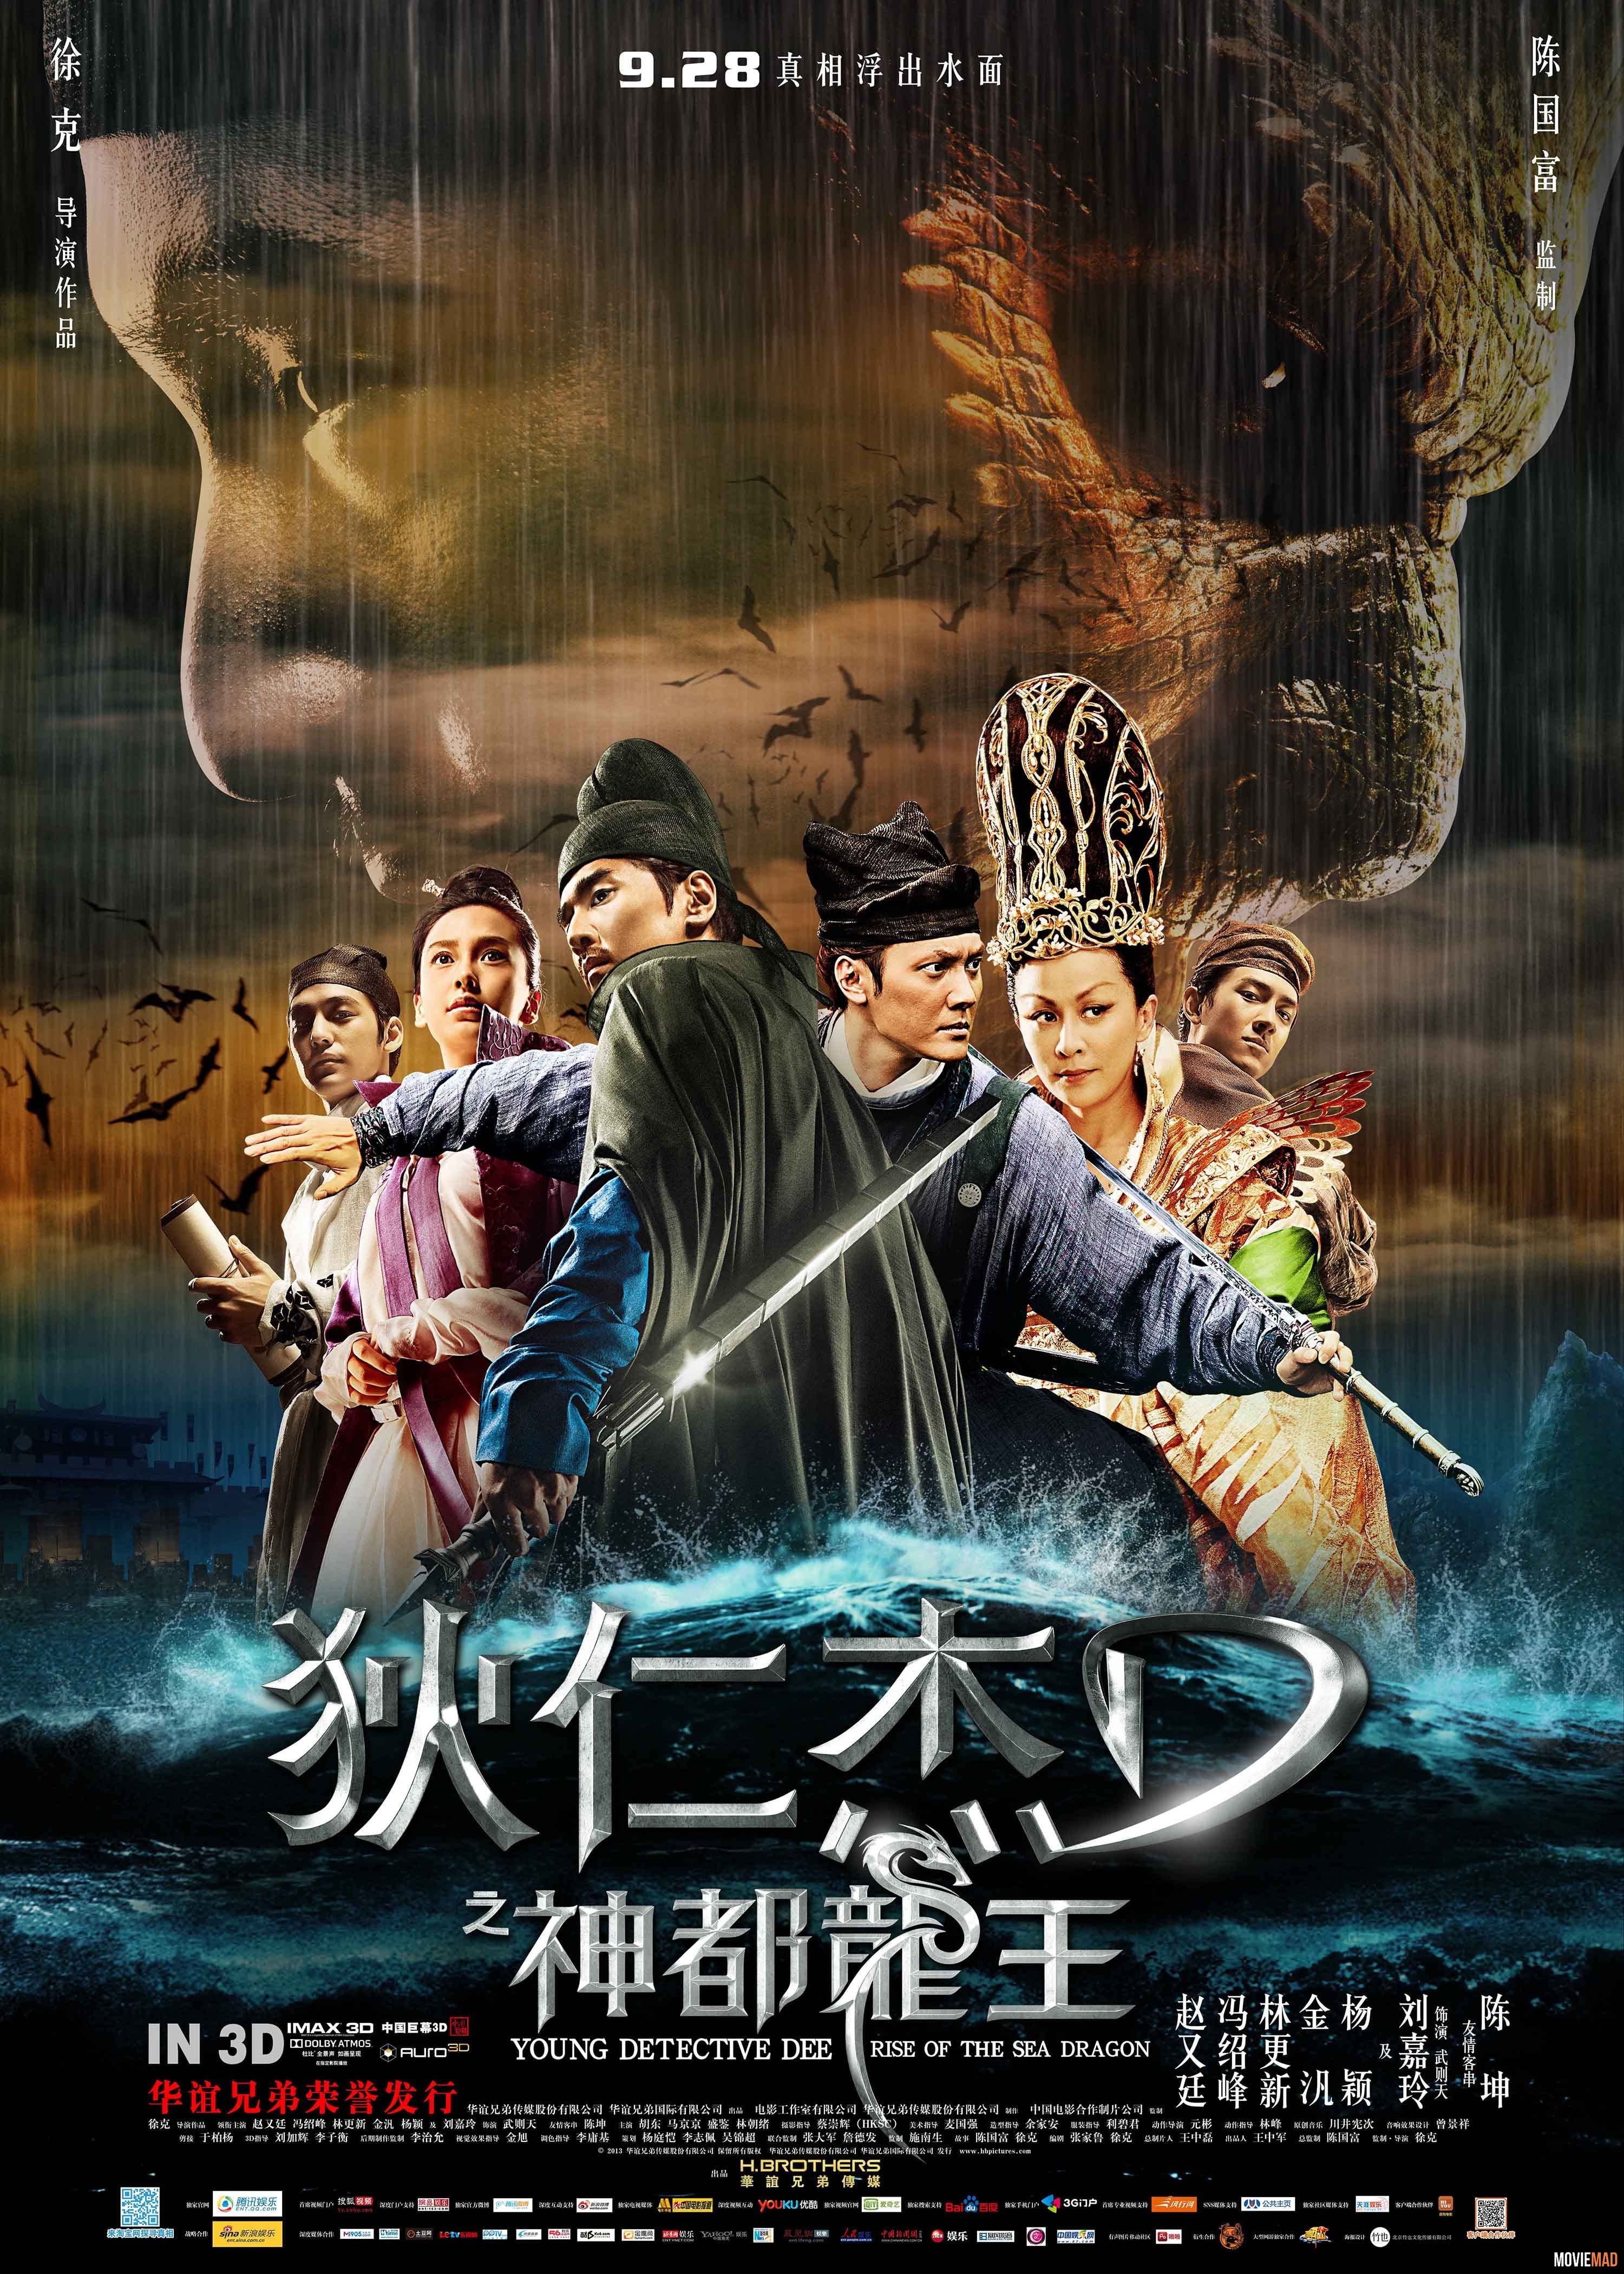 Young Detective Dee Rise of the Sea Dragon (2013) Hindi Dubbed ORG HDRip Full Movie 720p 480p